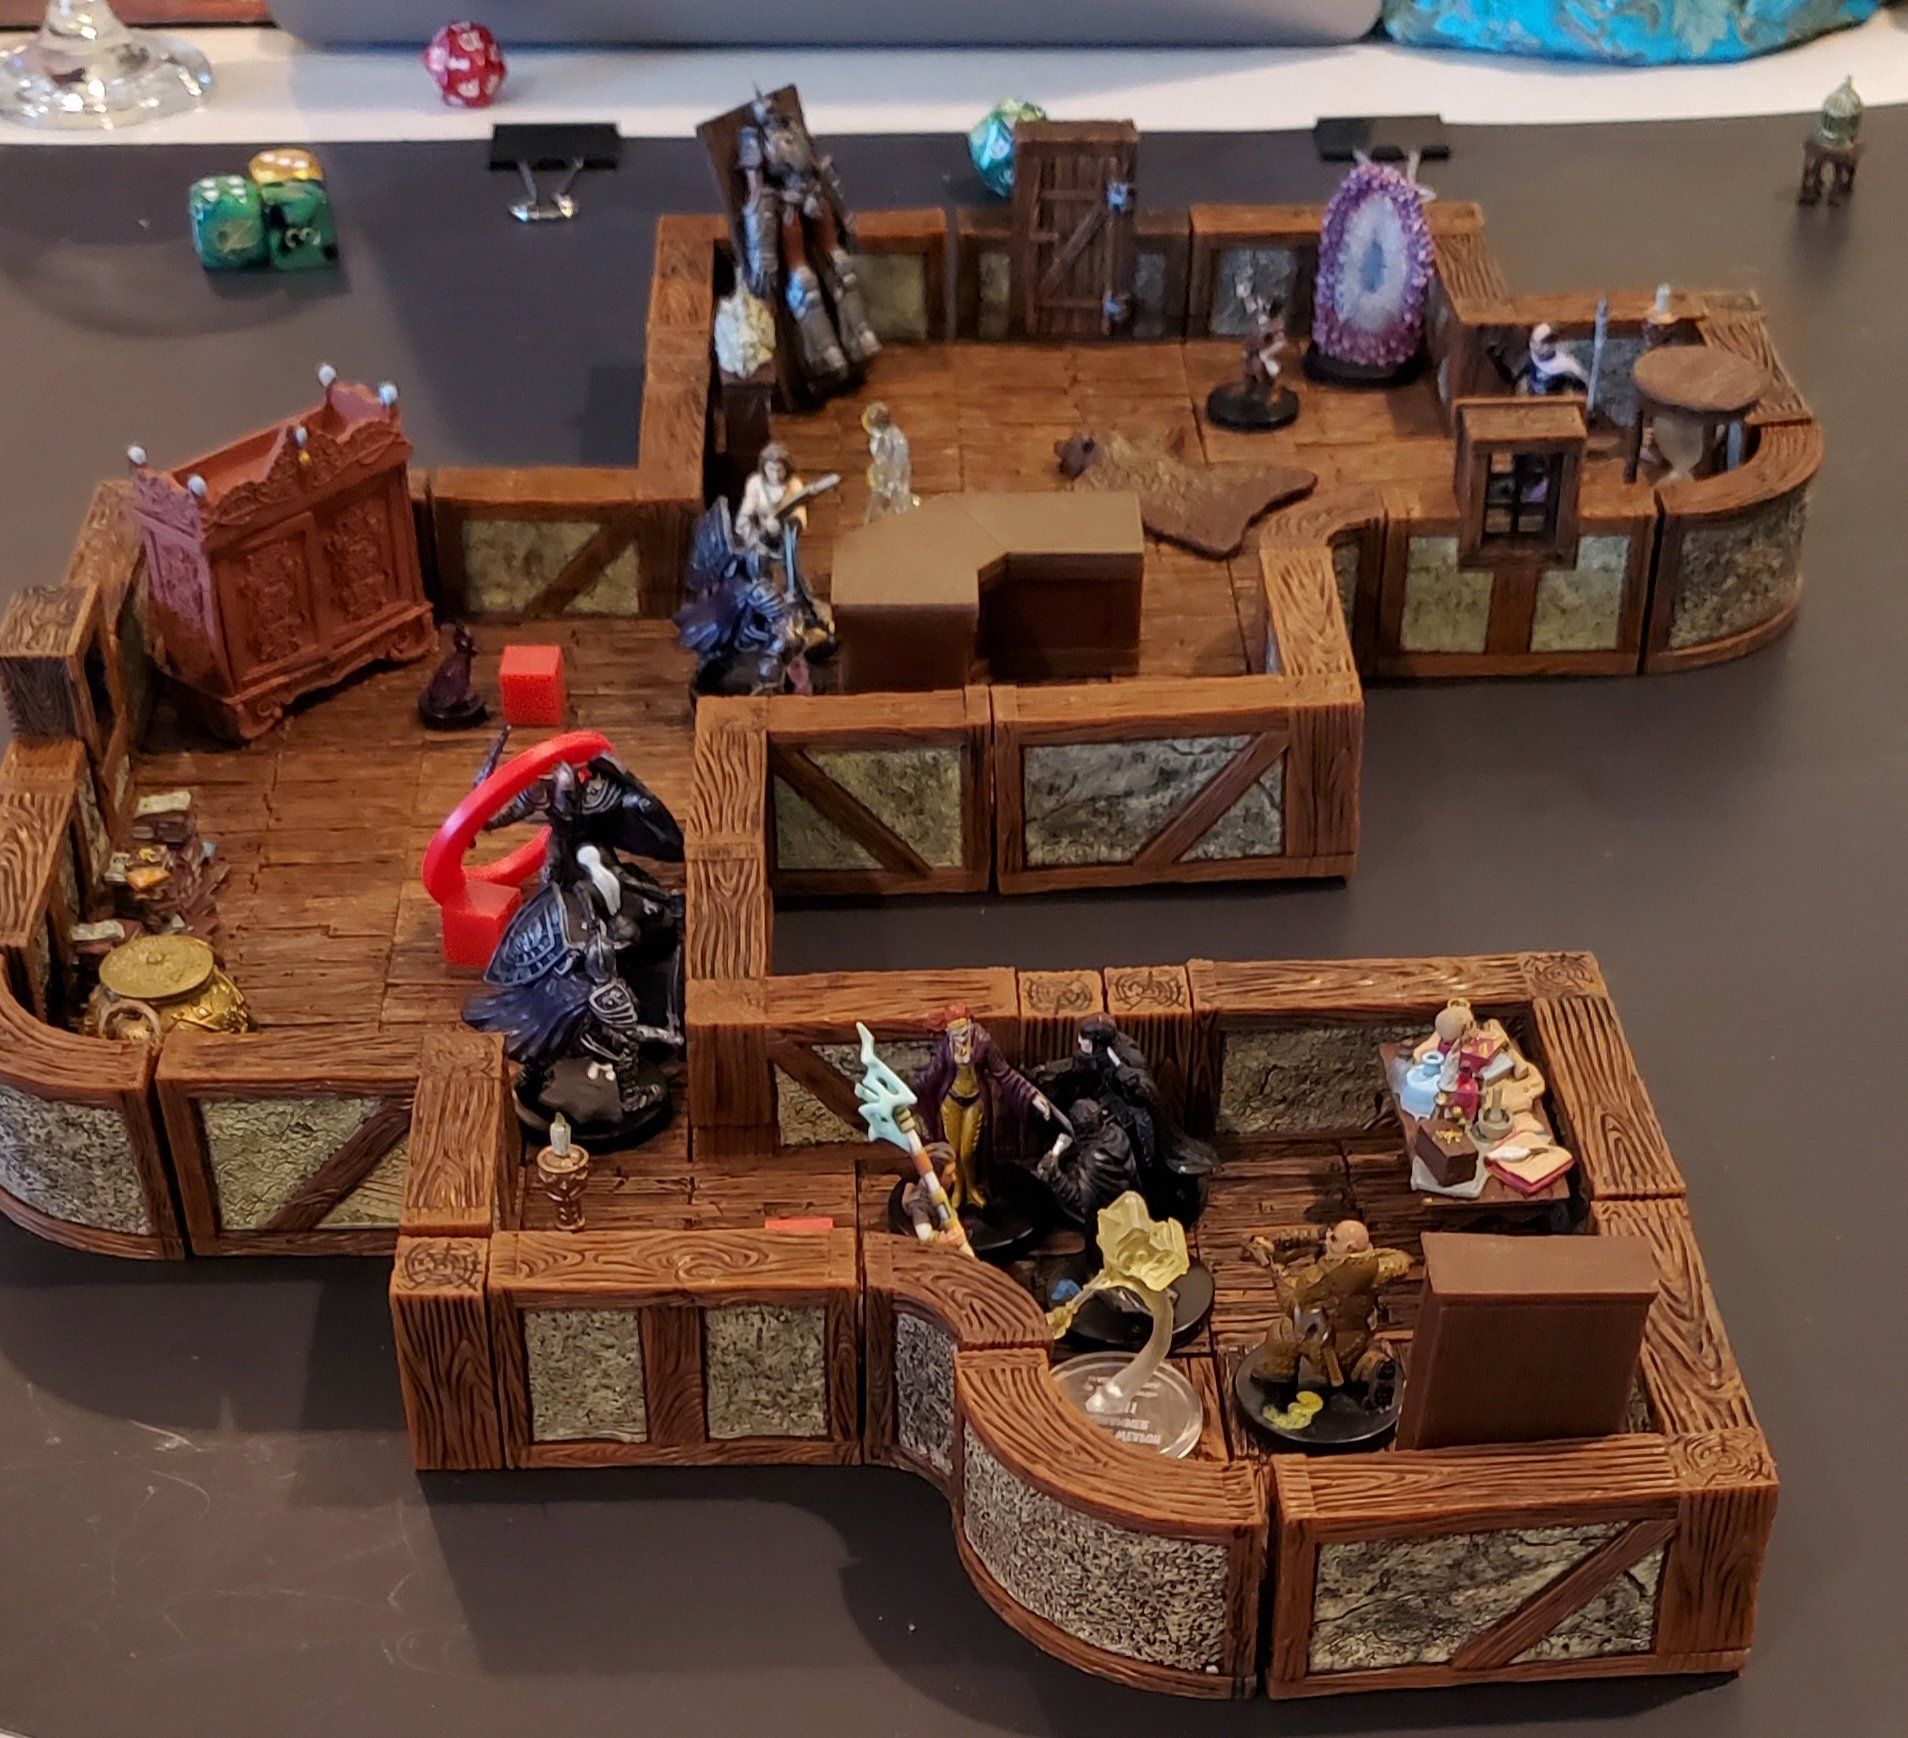 Dungeons and Dragons set up and ready to play with all the characters and accessories.